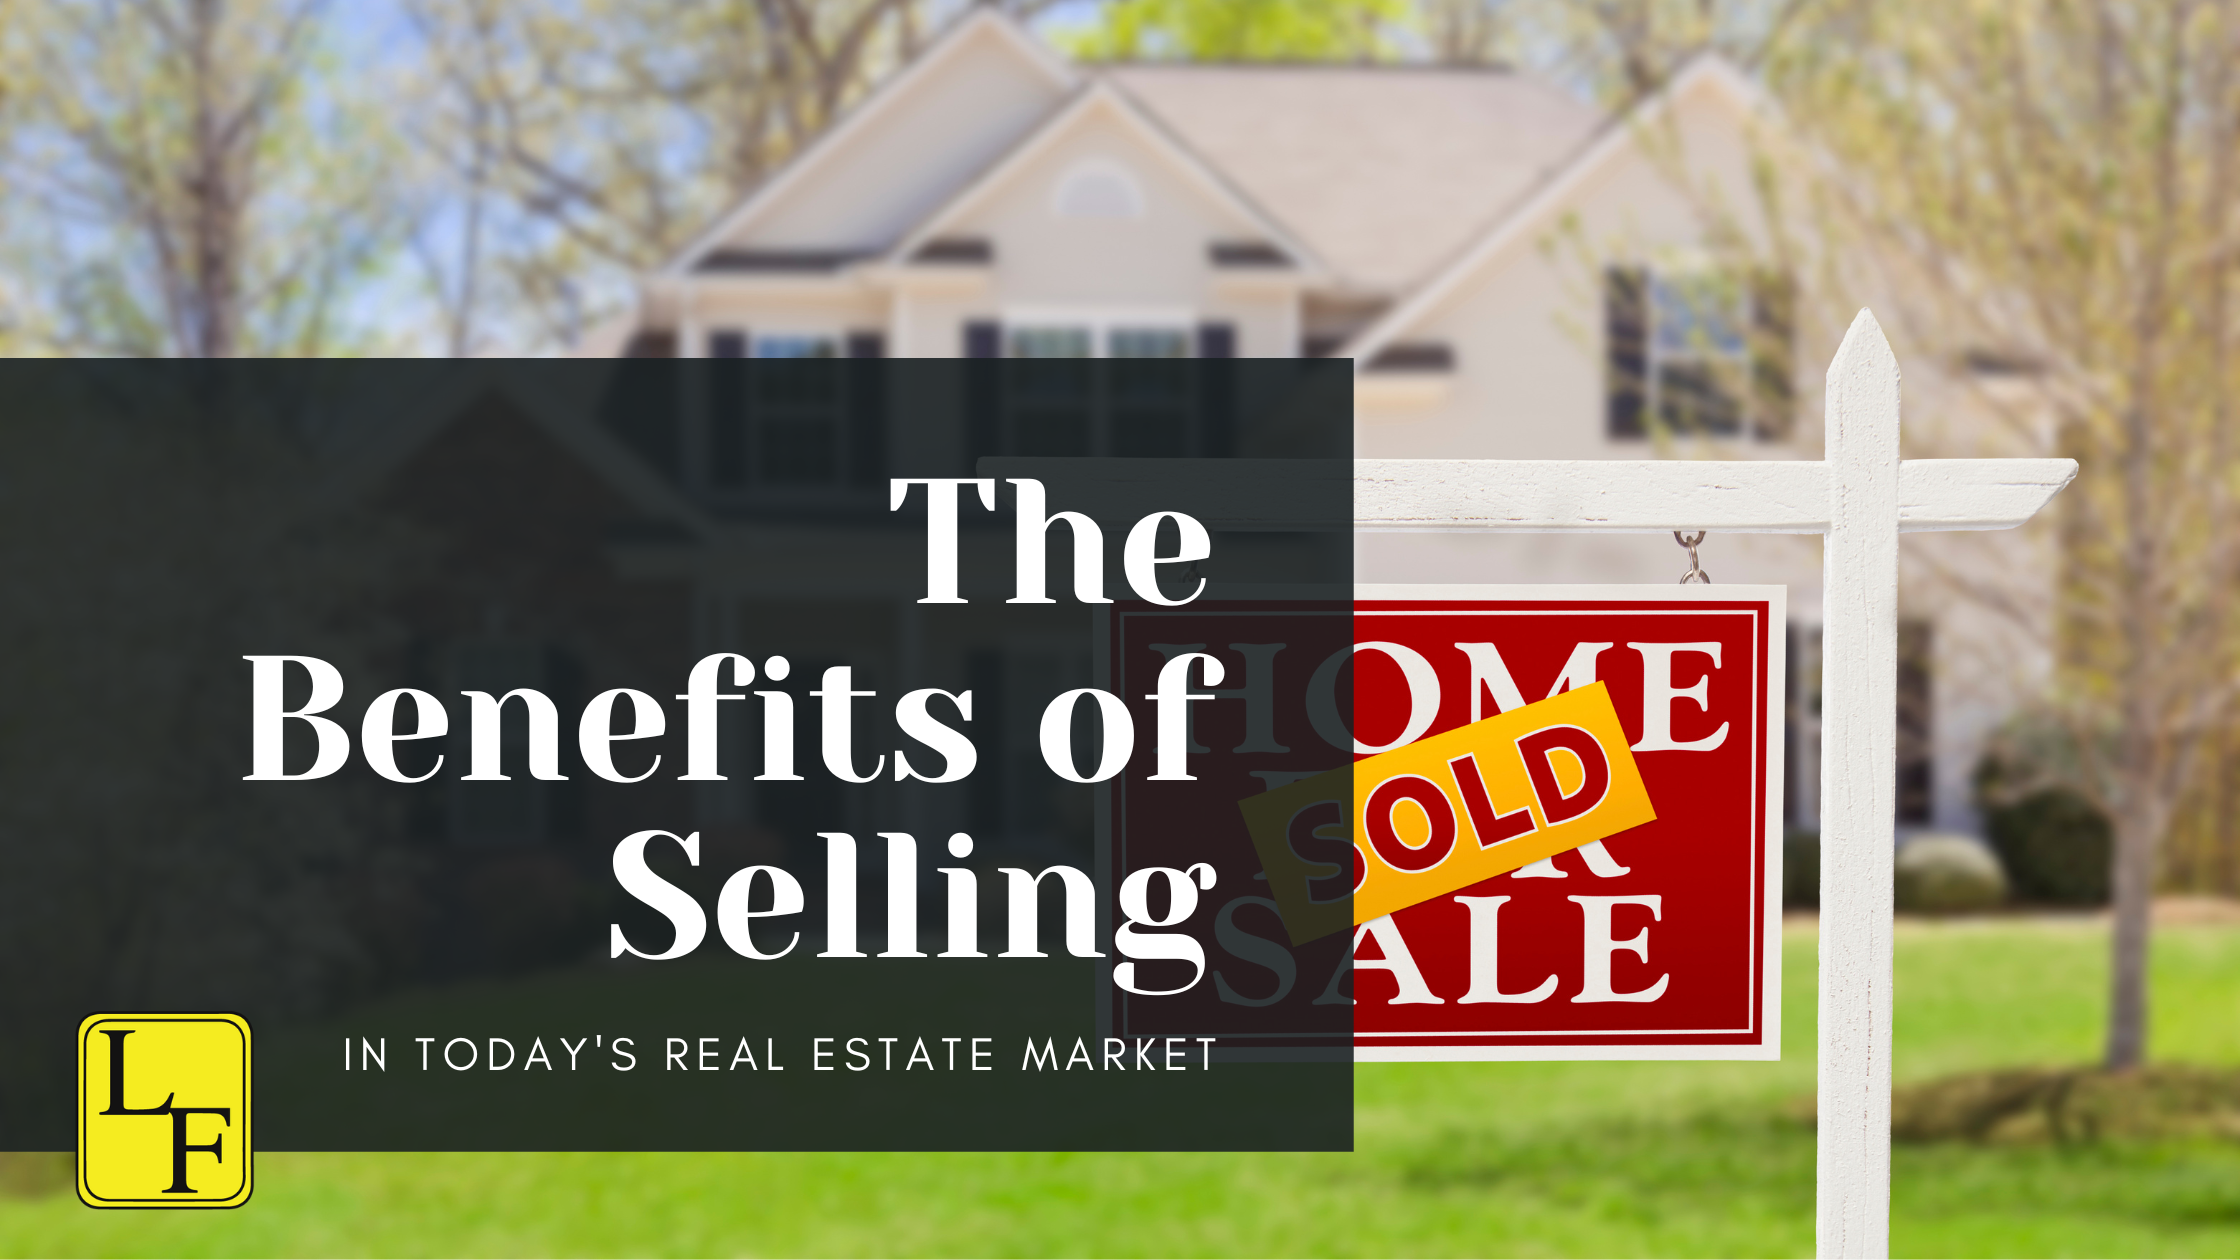 The Benefits of Selling in Today's Real Estate Market